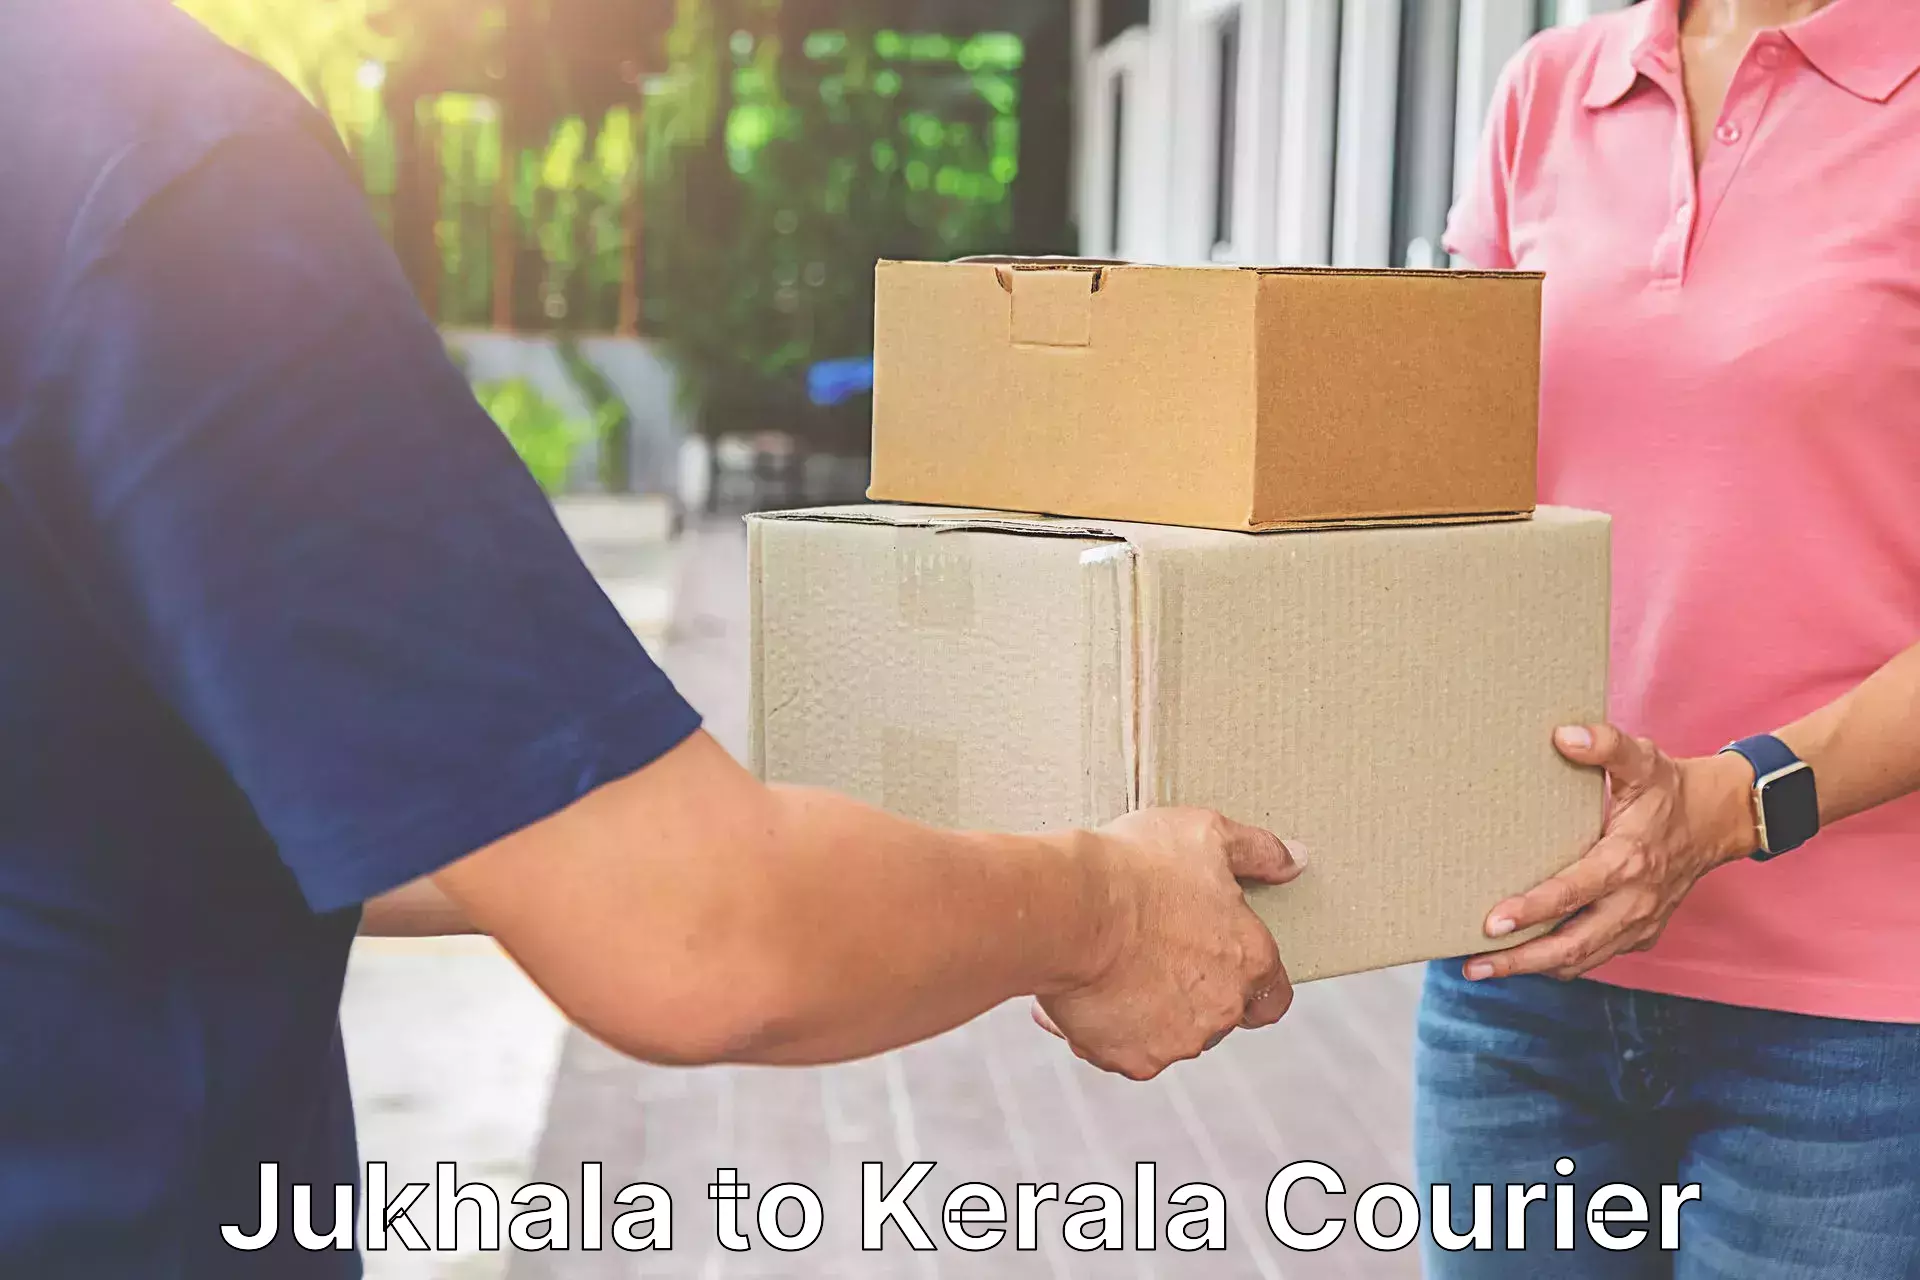 Efficient package consolidation Jukhala to Ramankary